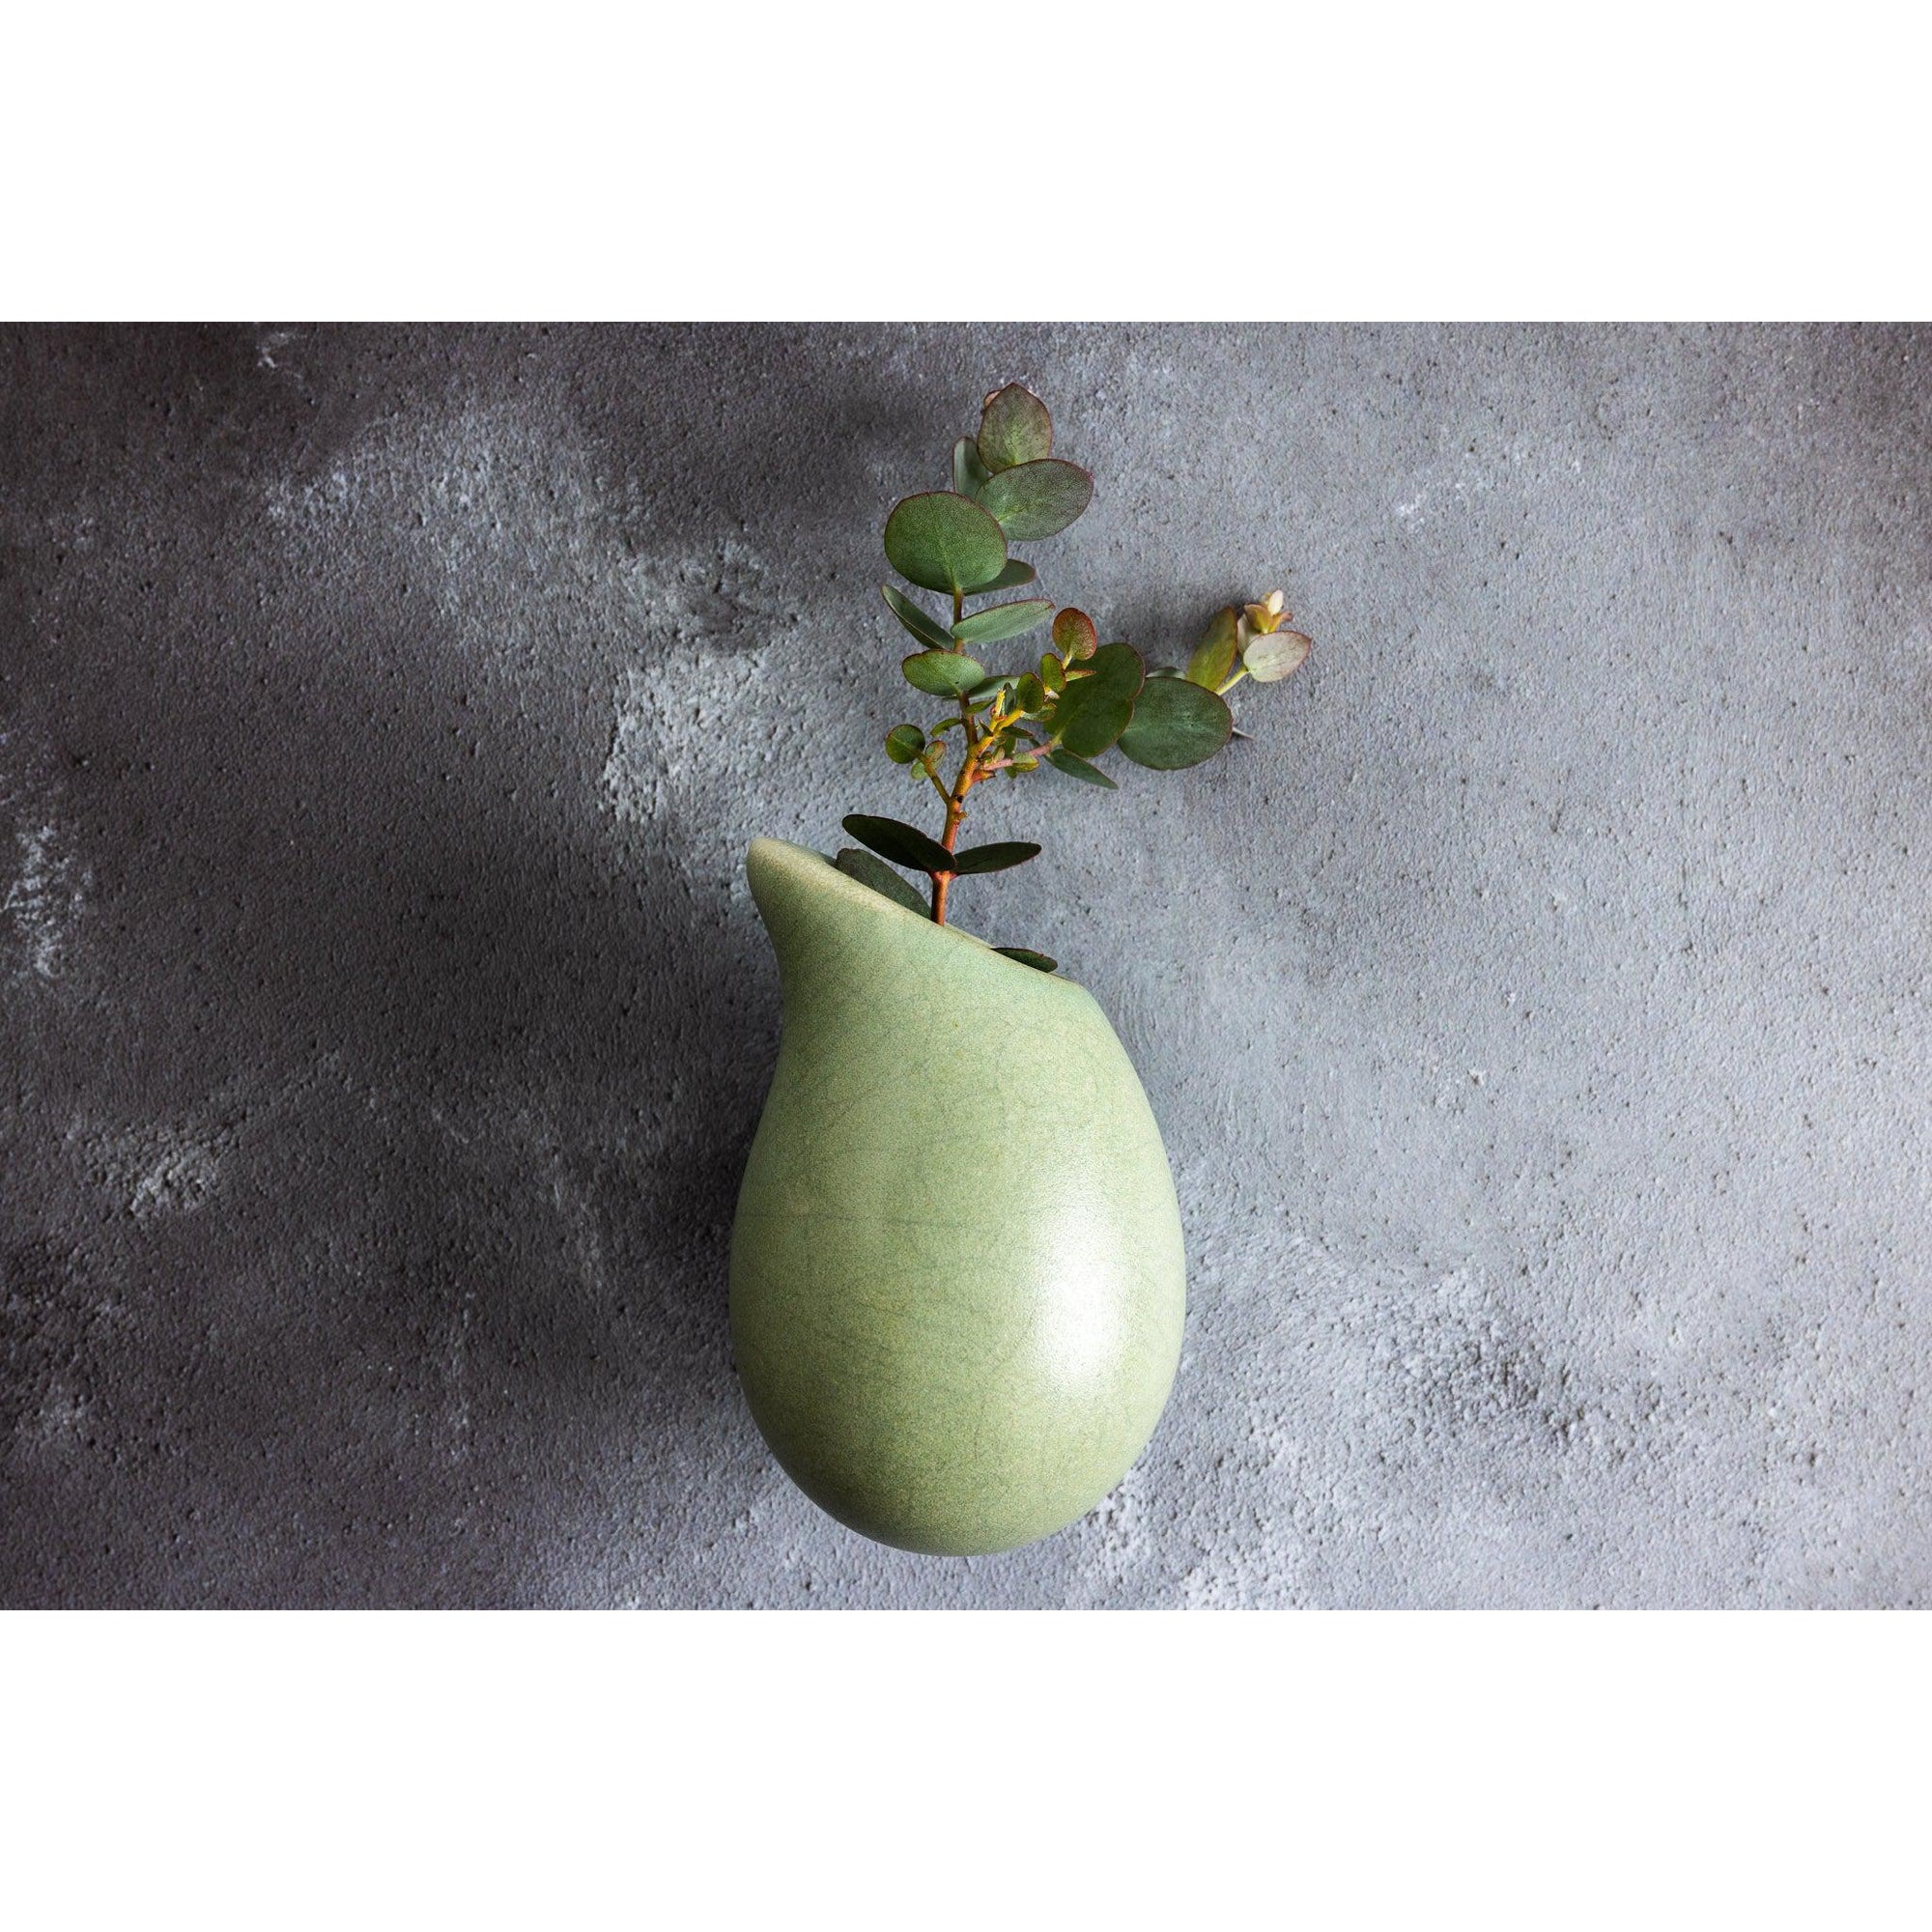 KSR3 Droplet Wall Vase by Kate Schuricht, available at Padstow Gallery, Cornwall